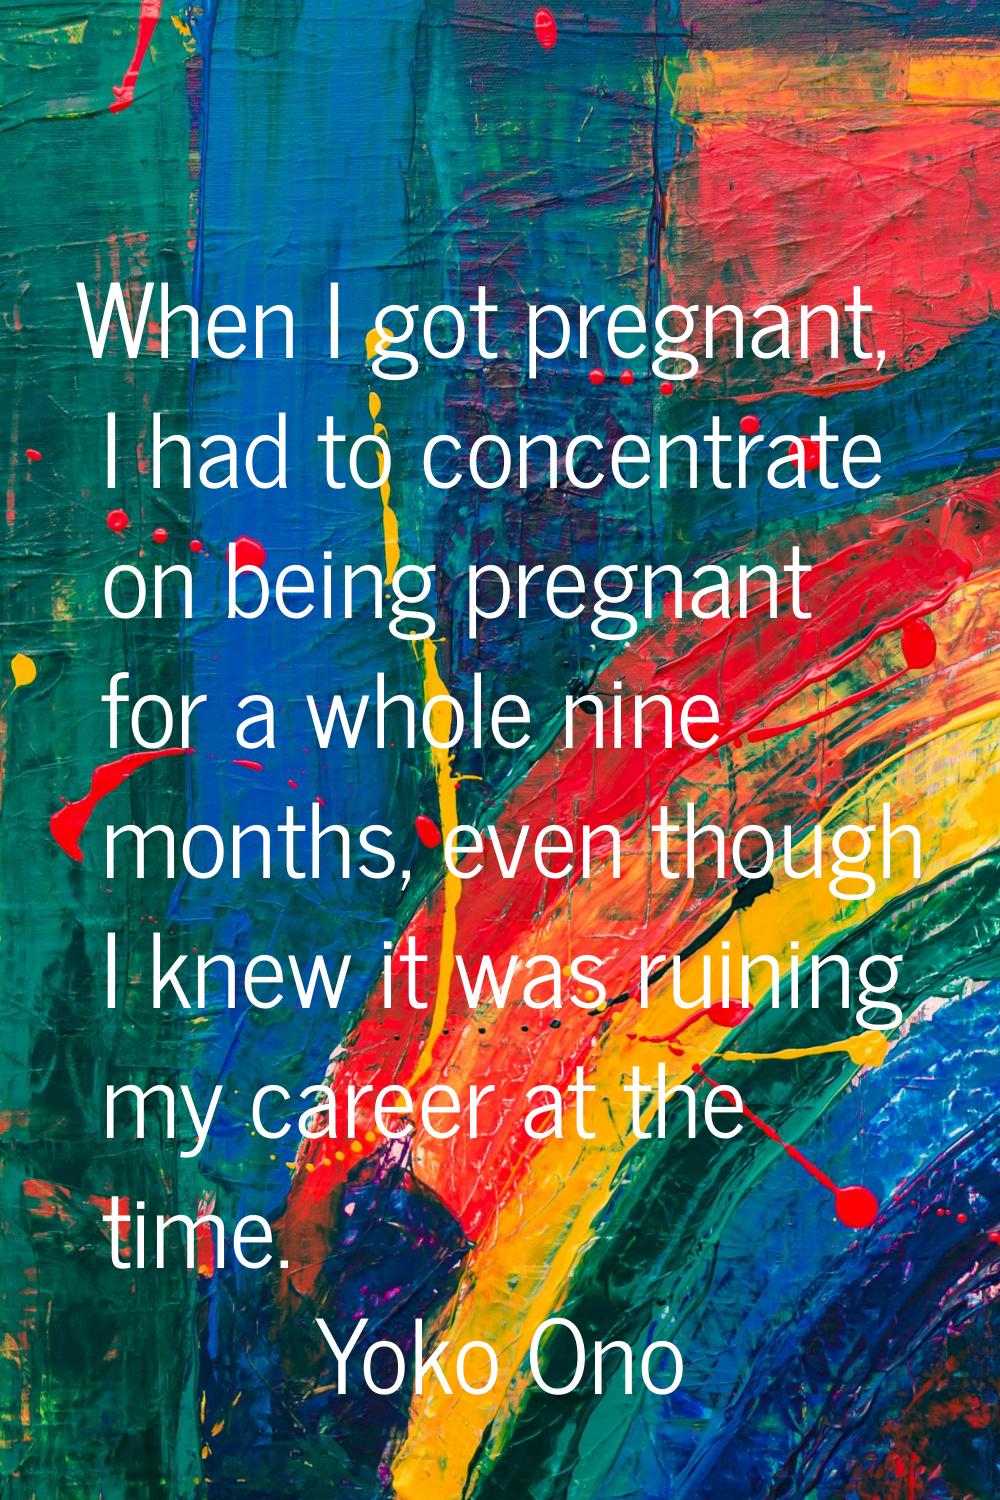 When I got pregnant, I had to concentrate on being pregnant for a whole nine months, even though I 